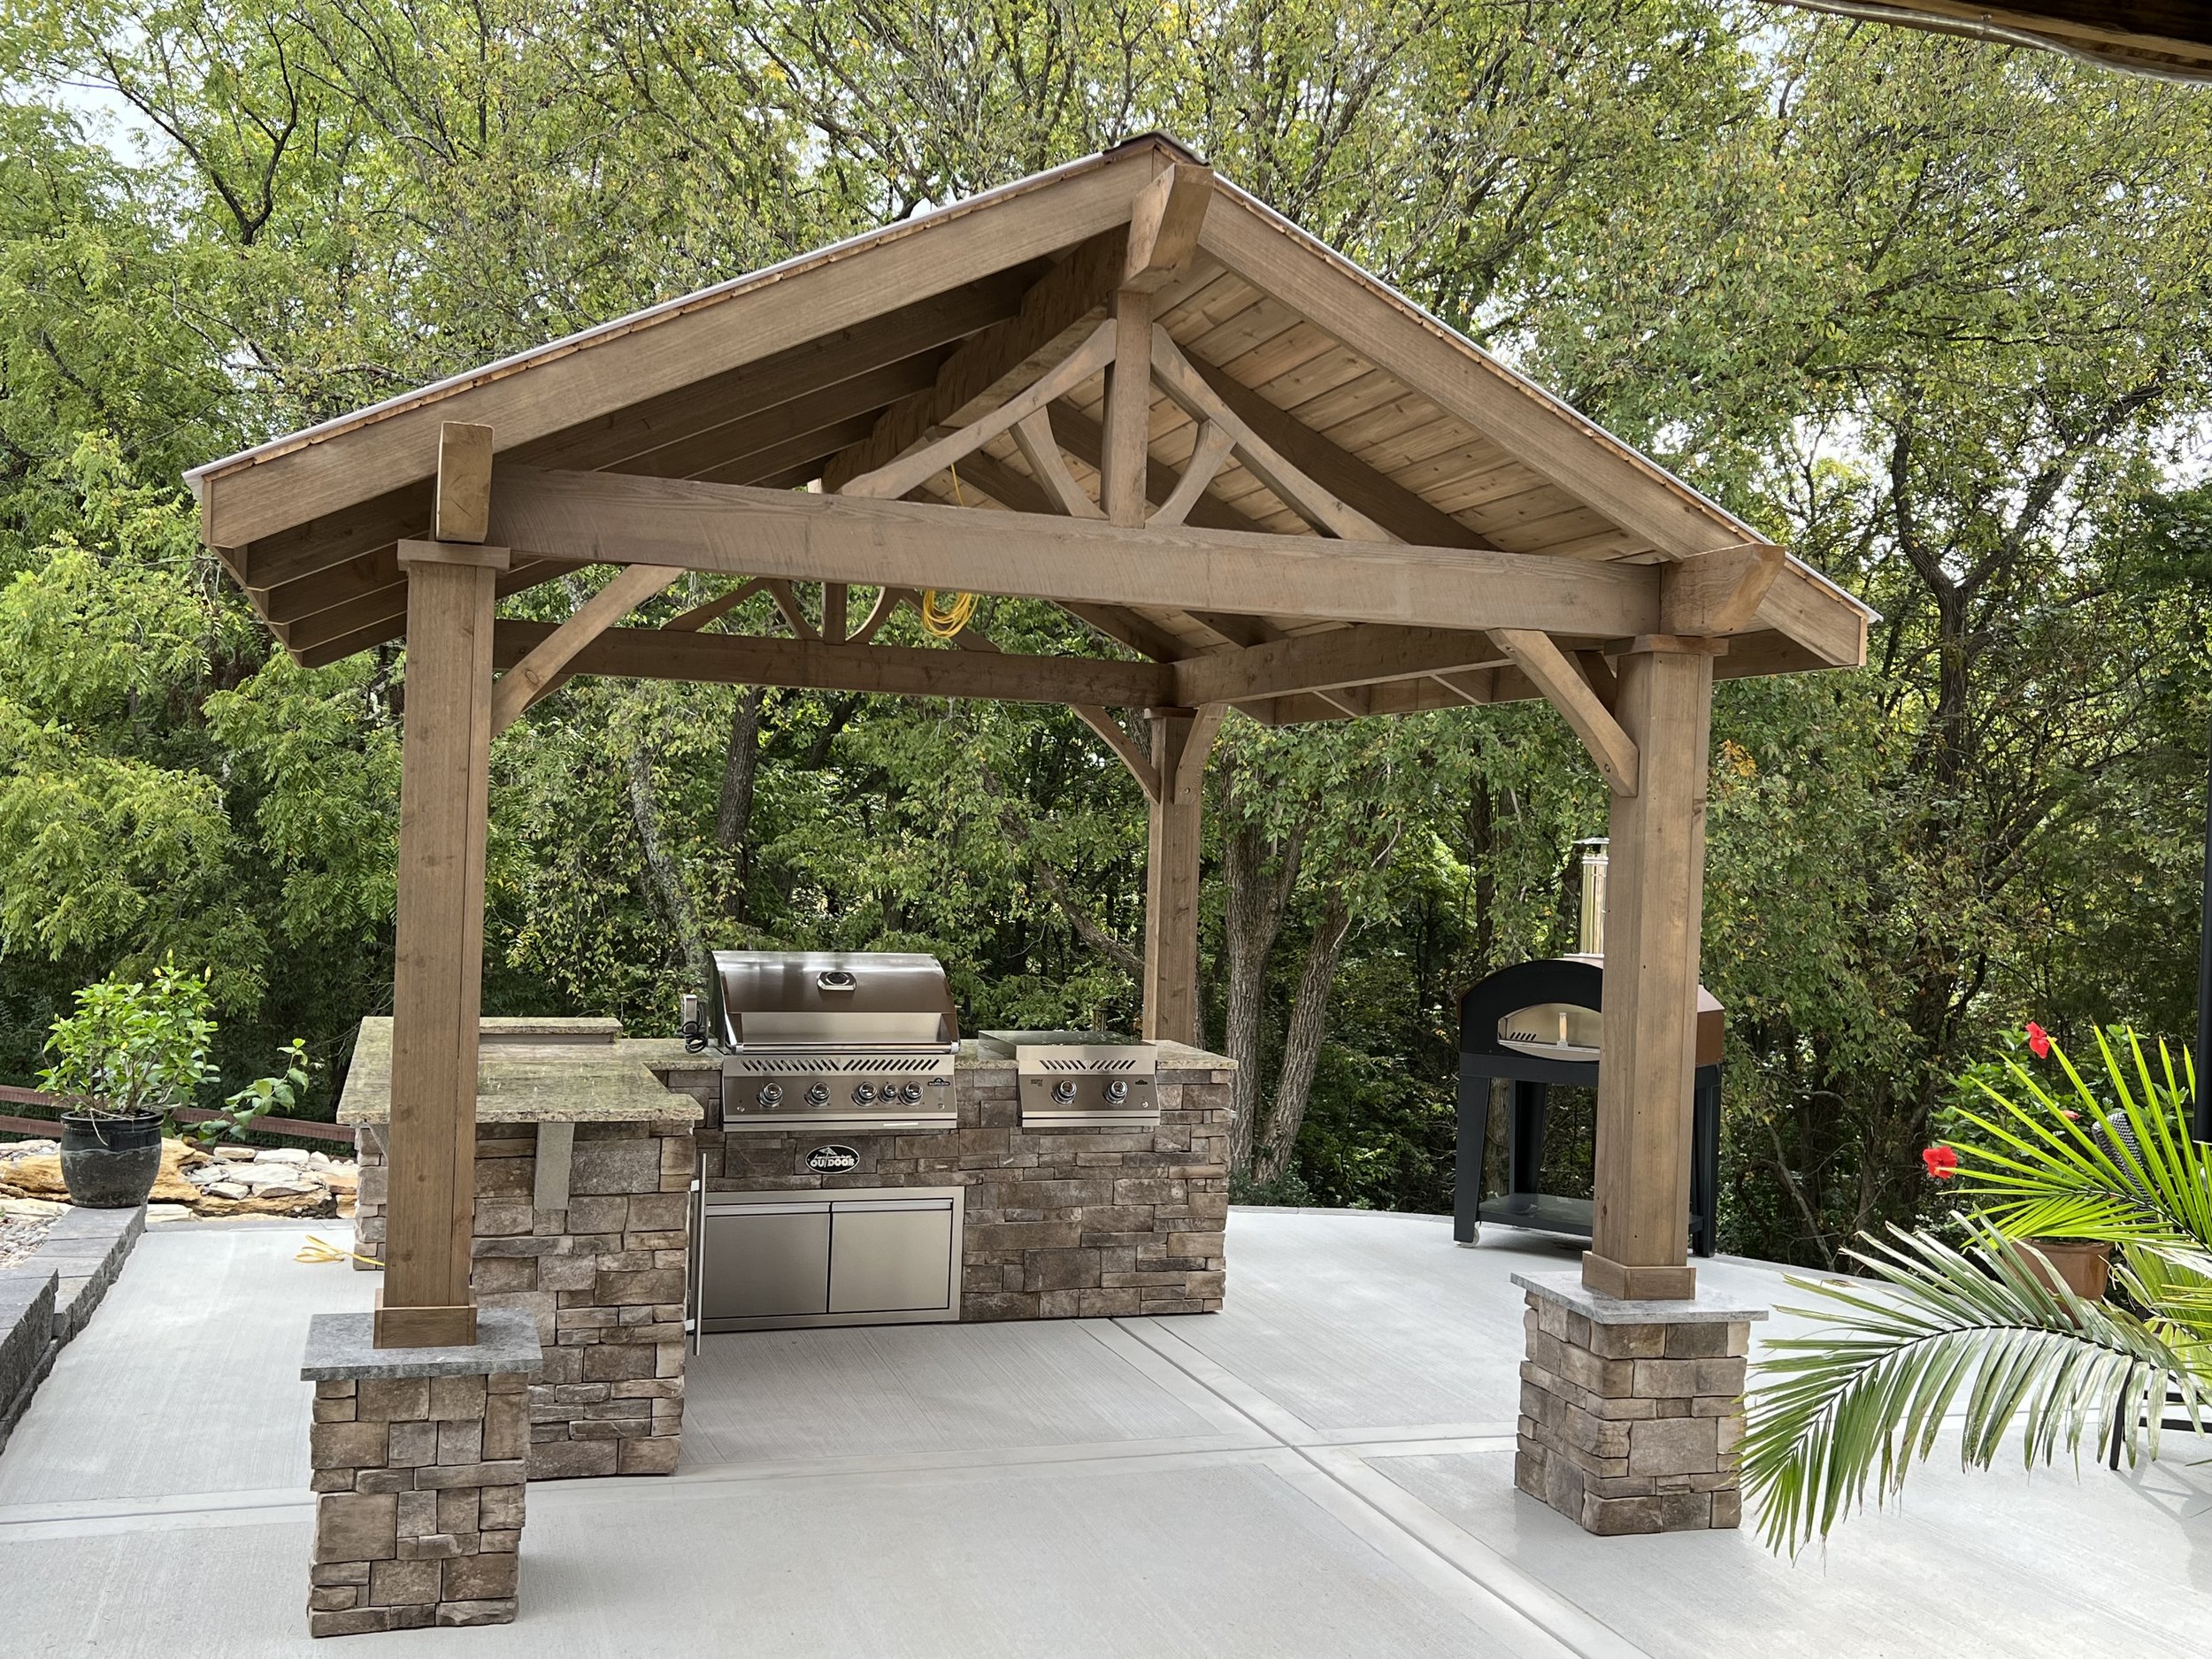 Artisan Pavilion with matching Triple Crown Outdoor Kitchen Island